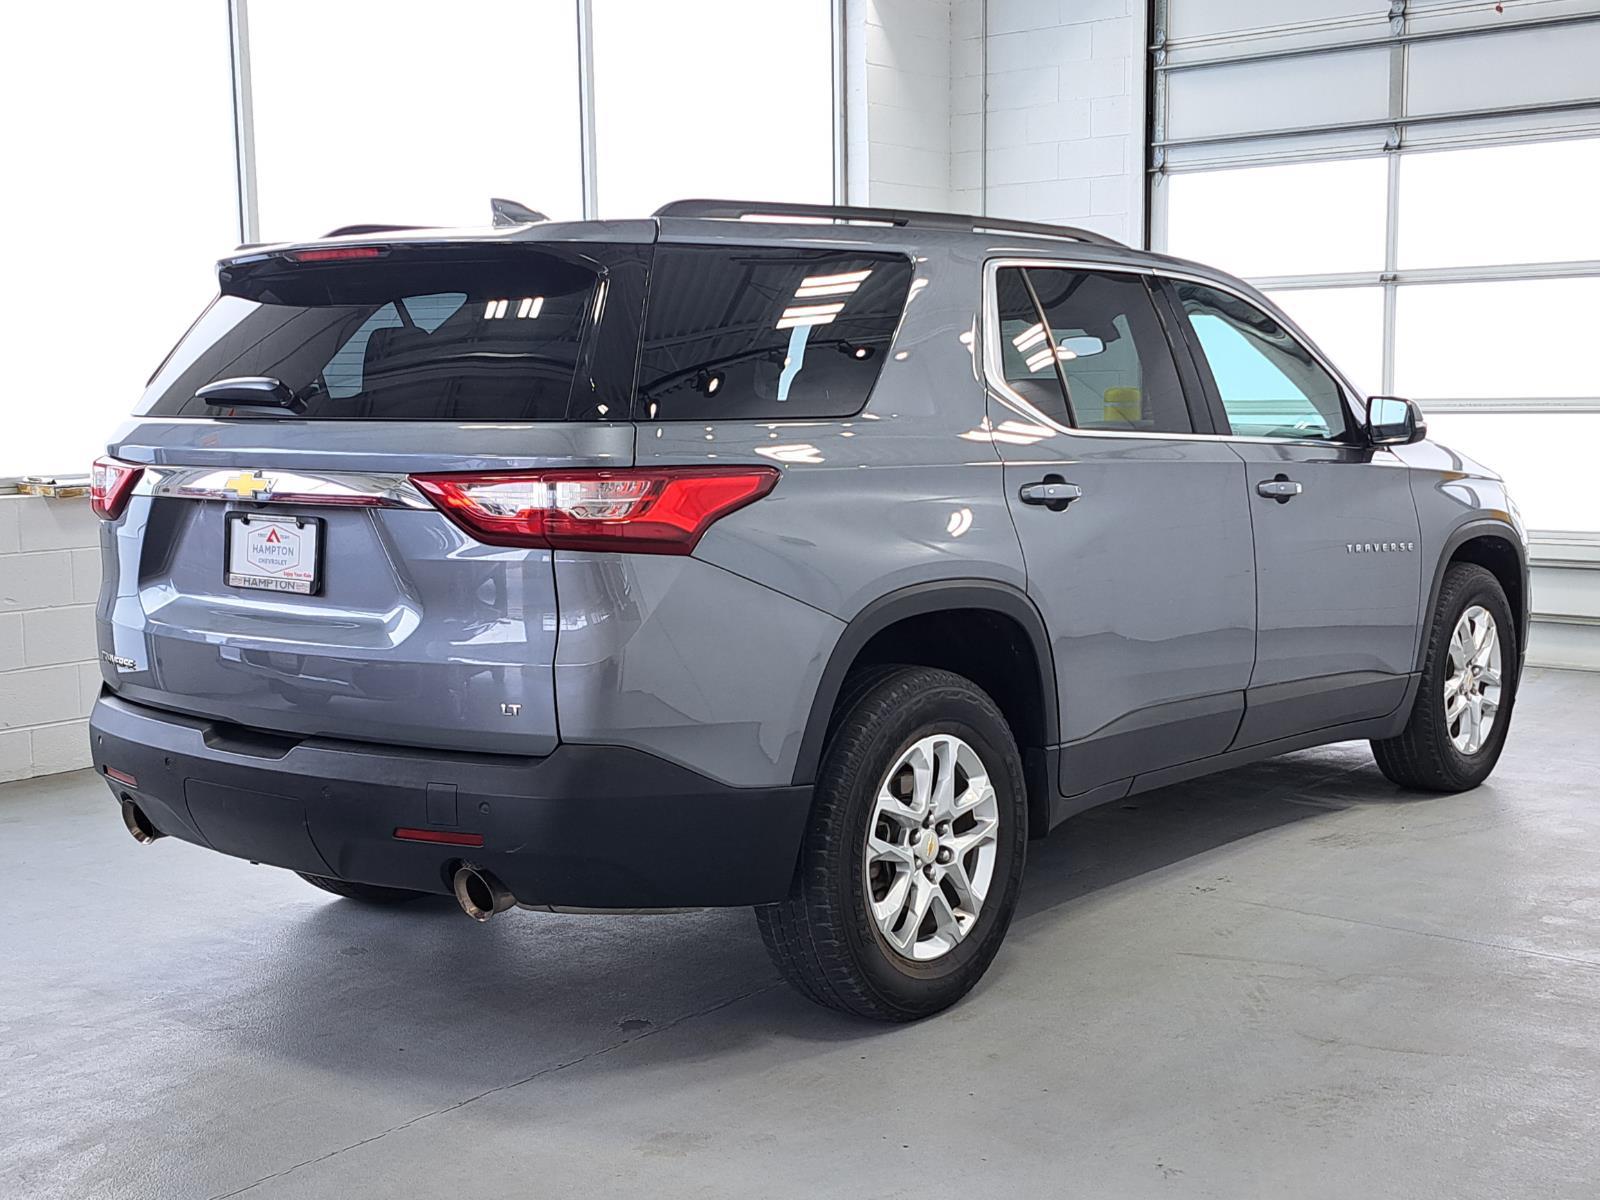 2019 Chevrolet Traverse LT Leather SUV Front Wheel Drive 4